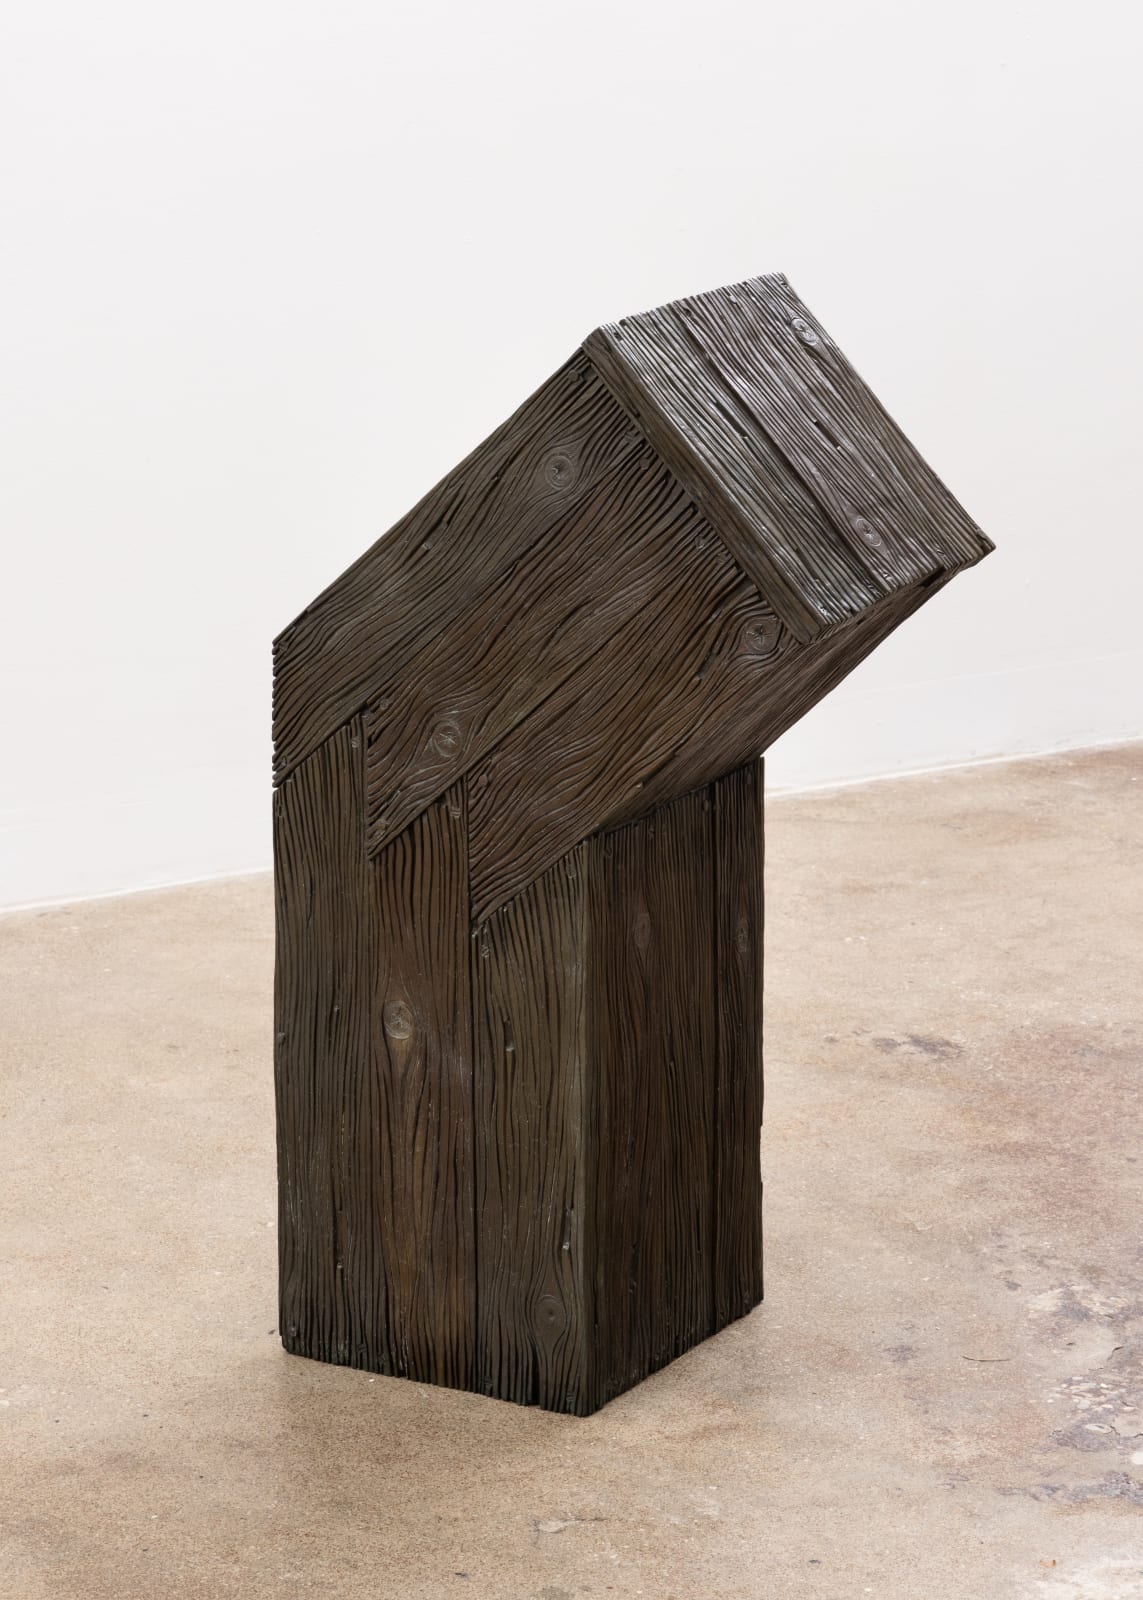 Free-standing bronze sculpture in the form of a wooden beam bent at a 45-degree angle toward the top, cast with a surface texture resembling wood grain